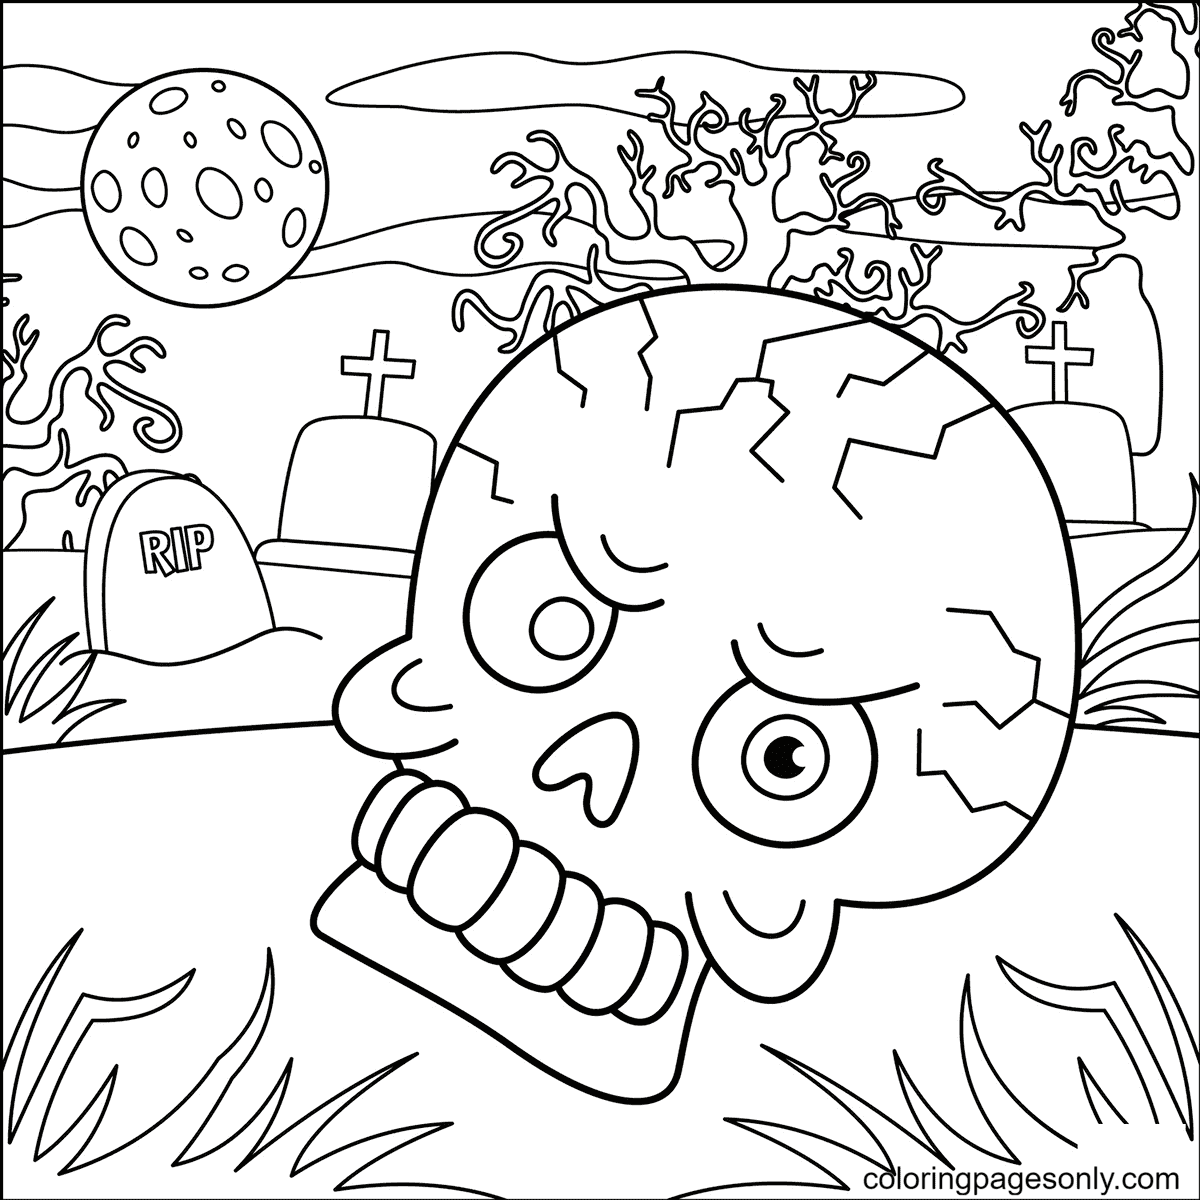 Evil Skull Coloring Page